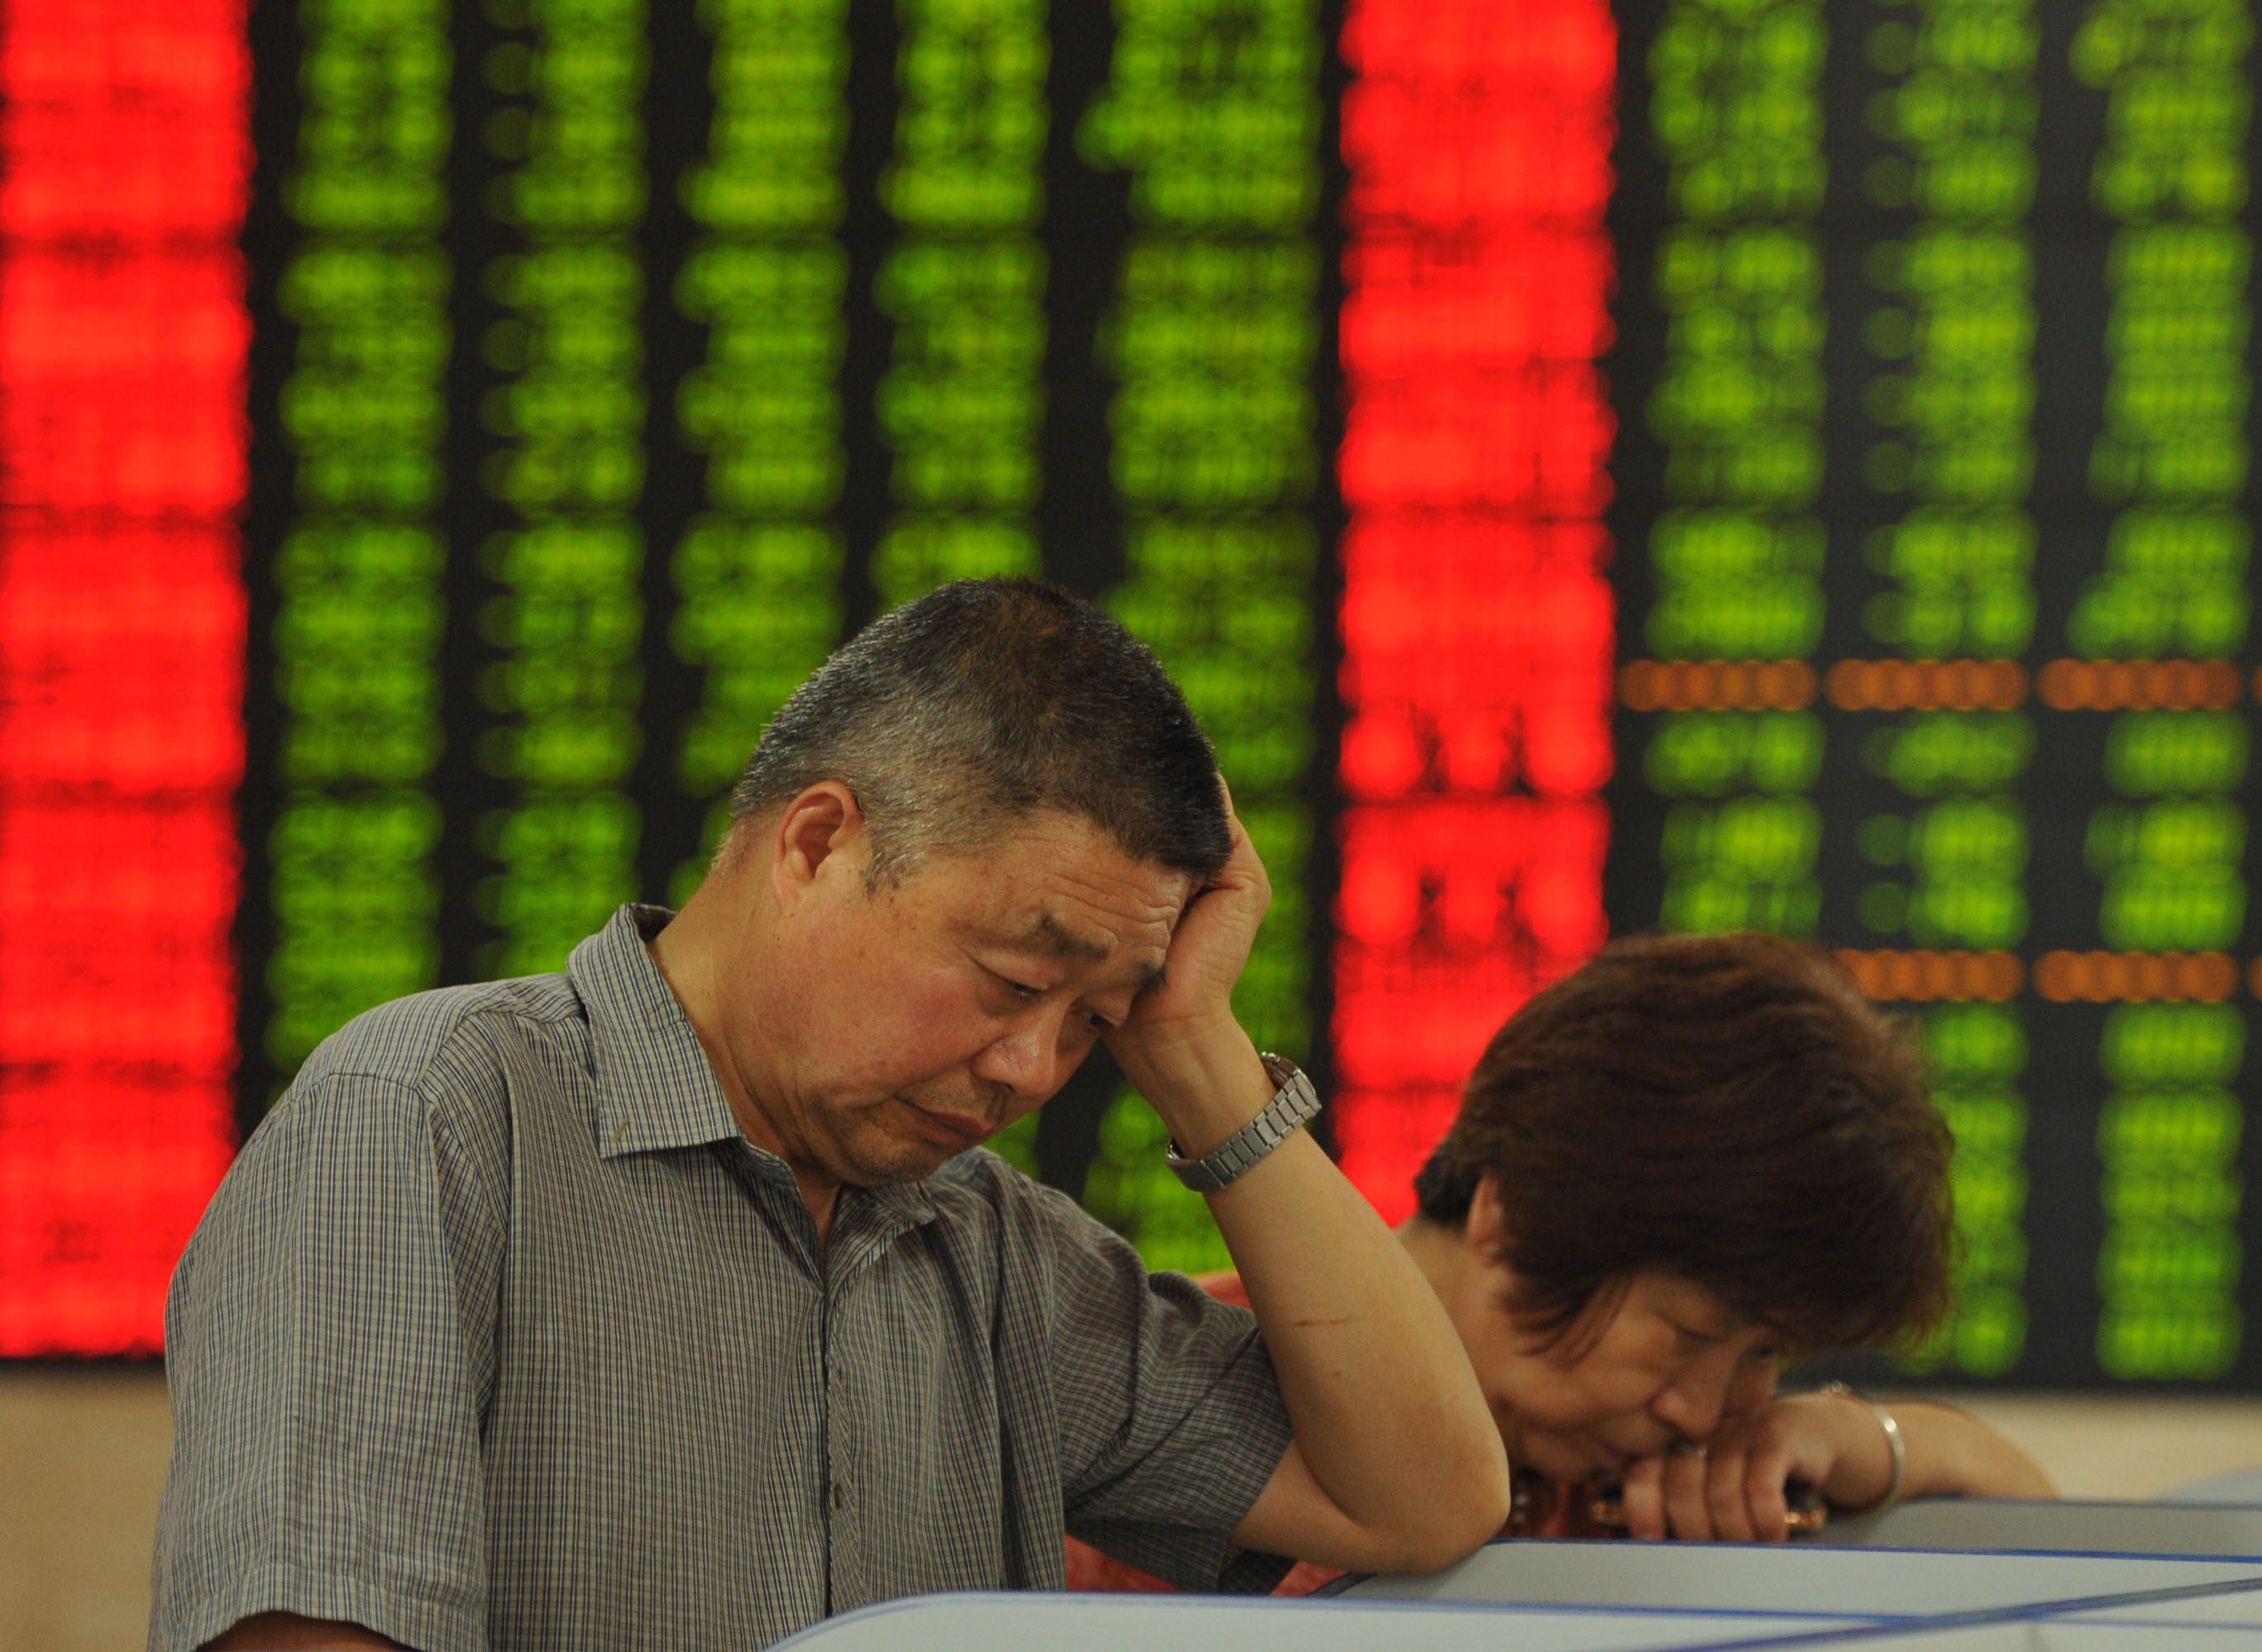 The Chinese stock market has faced its own 'Black Monday'